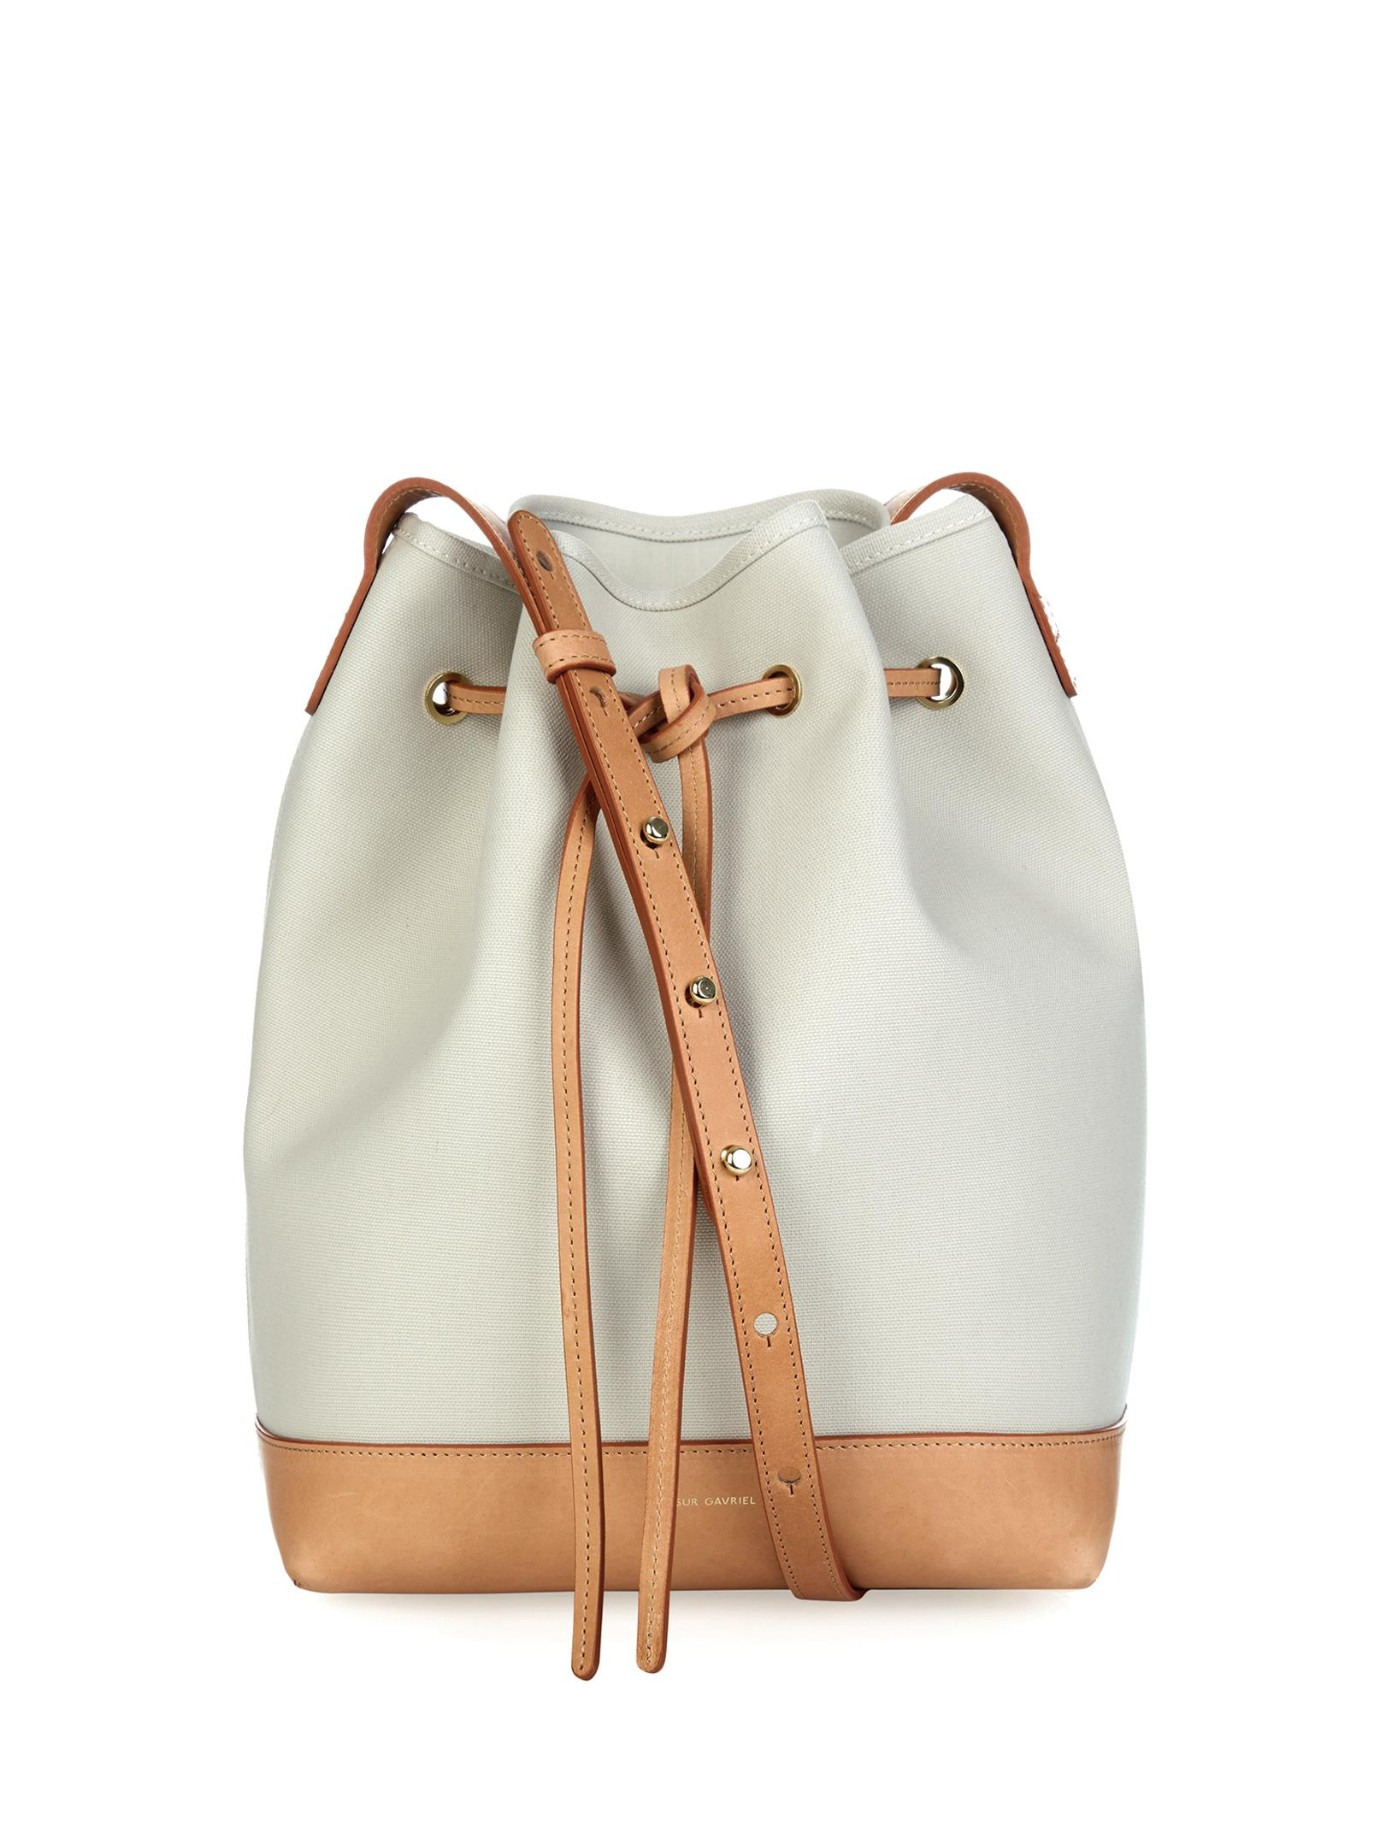 Mansur Gavriel Large Canvas And Leather Bucket Bag in White - Lyst